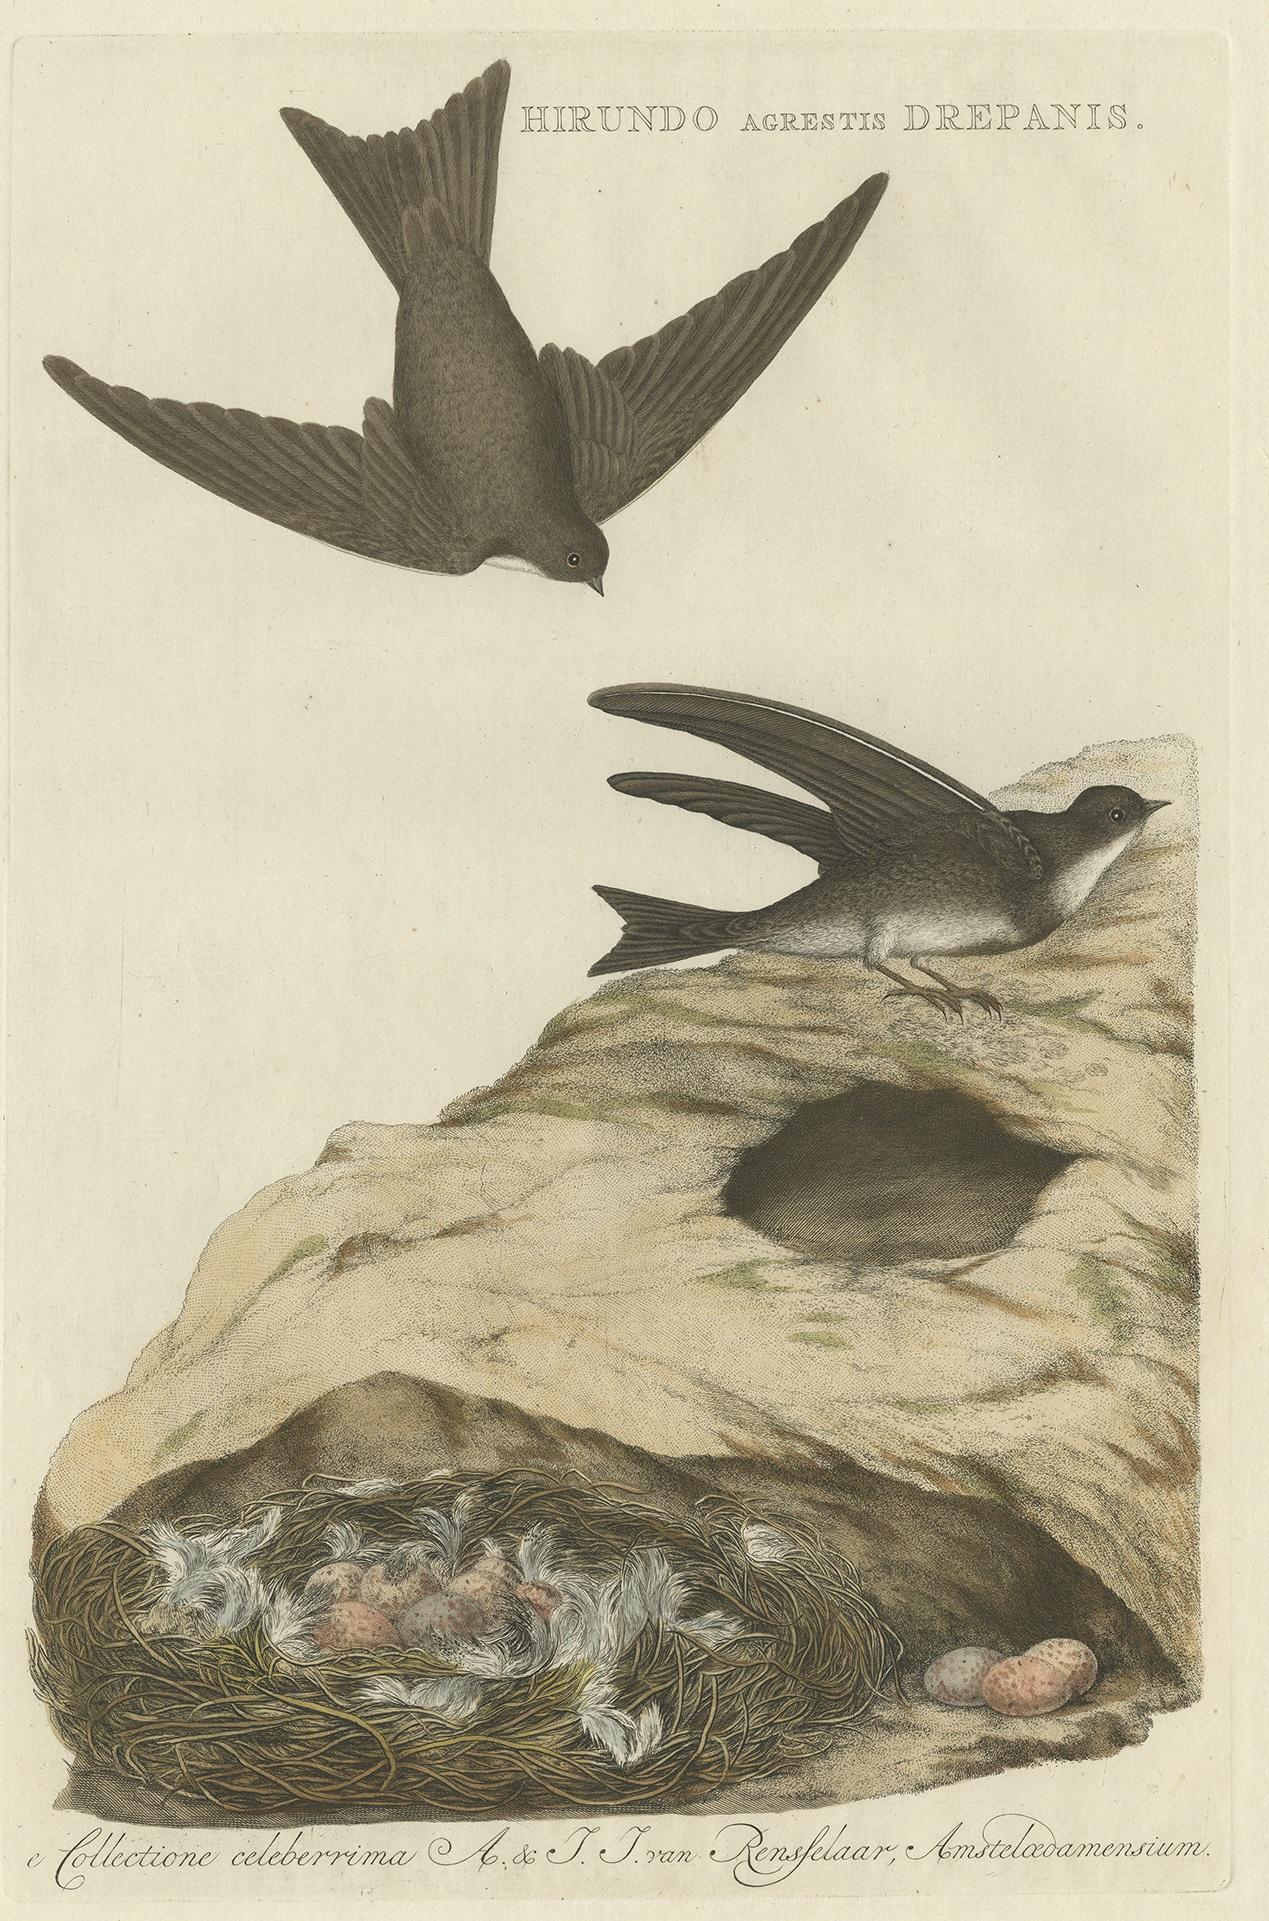 Antique print titled ‘Hirundo Agrestis Drepanis'. This print depicts the sand martin with nest and eggs (Dutch: oeverzwaluw). The sand martin (Riparia riparia) or European sand martin, bank swallow in the Americas, and collared sand martin in the